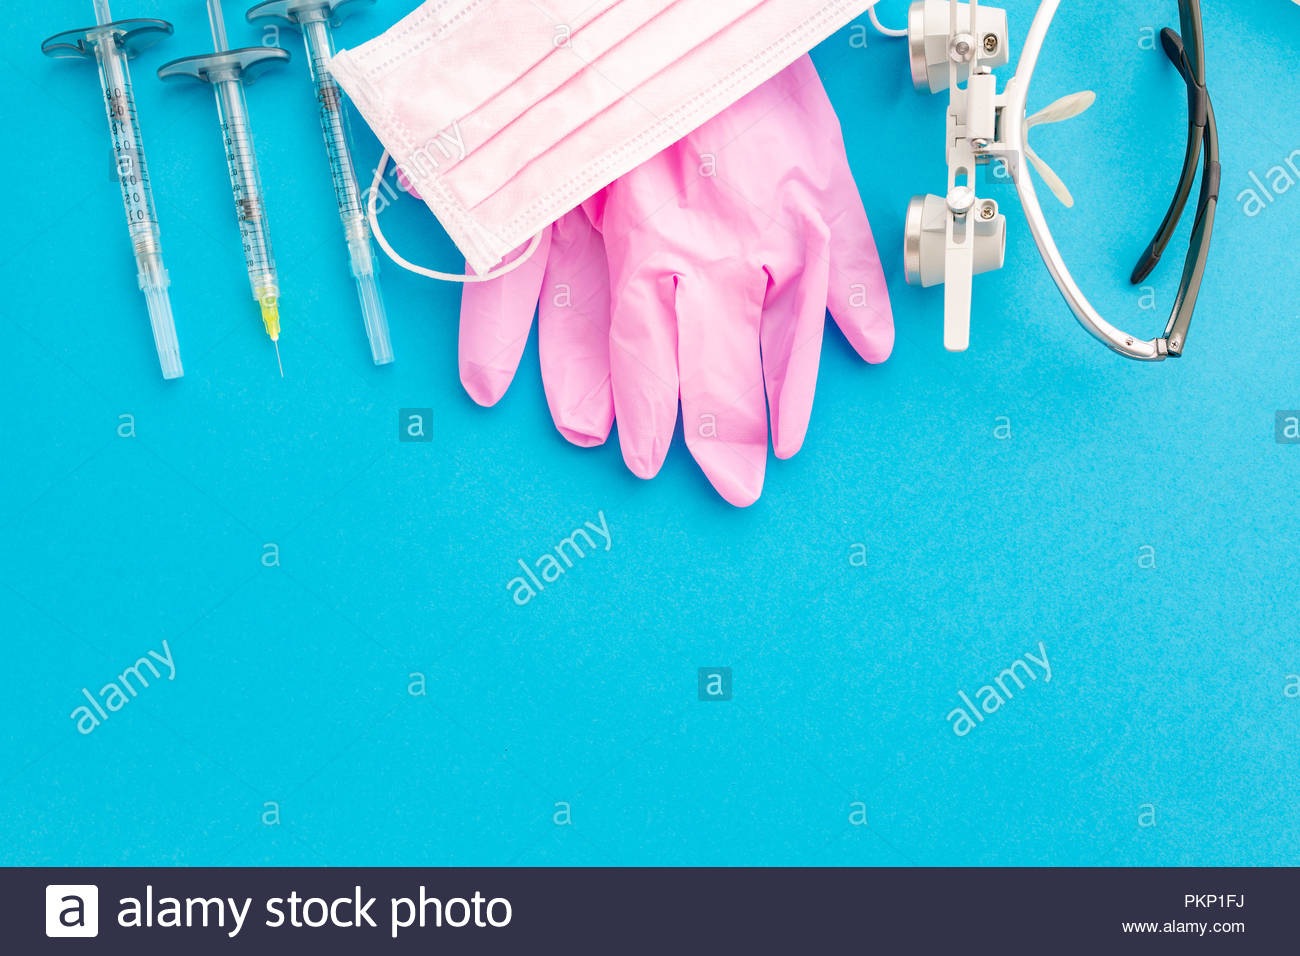 Medical Equipments Including Surgical Instruments On A Blue